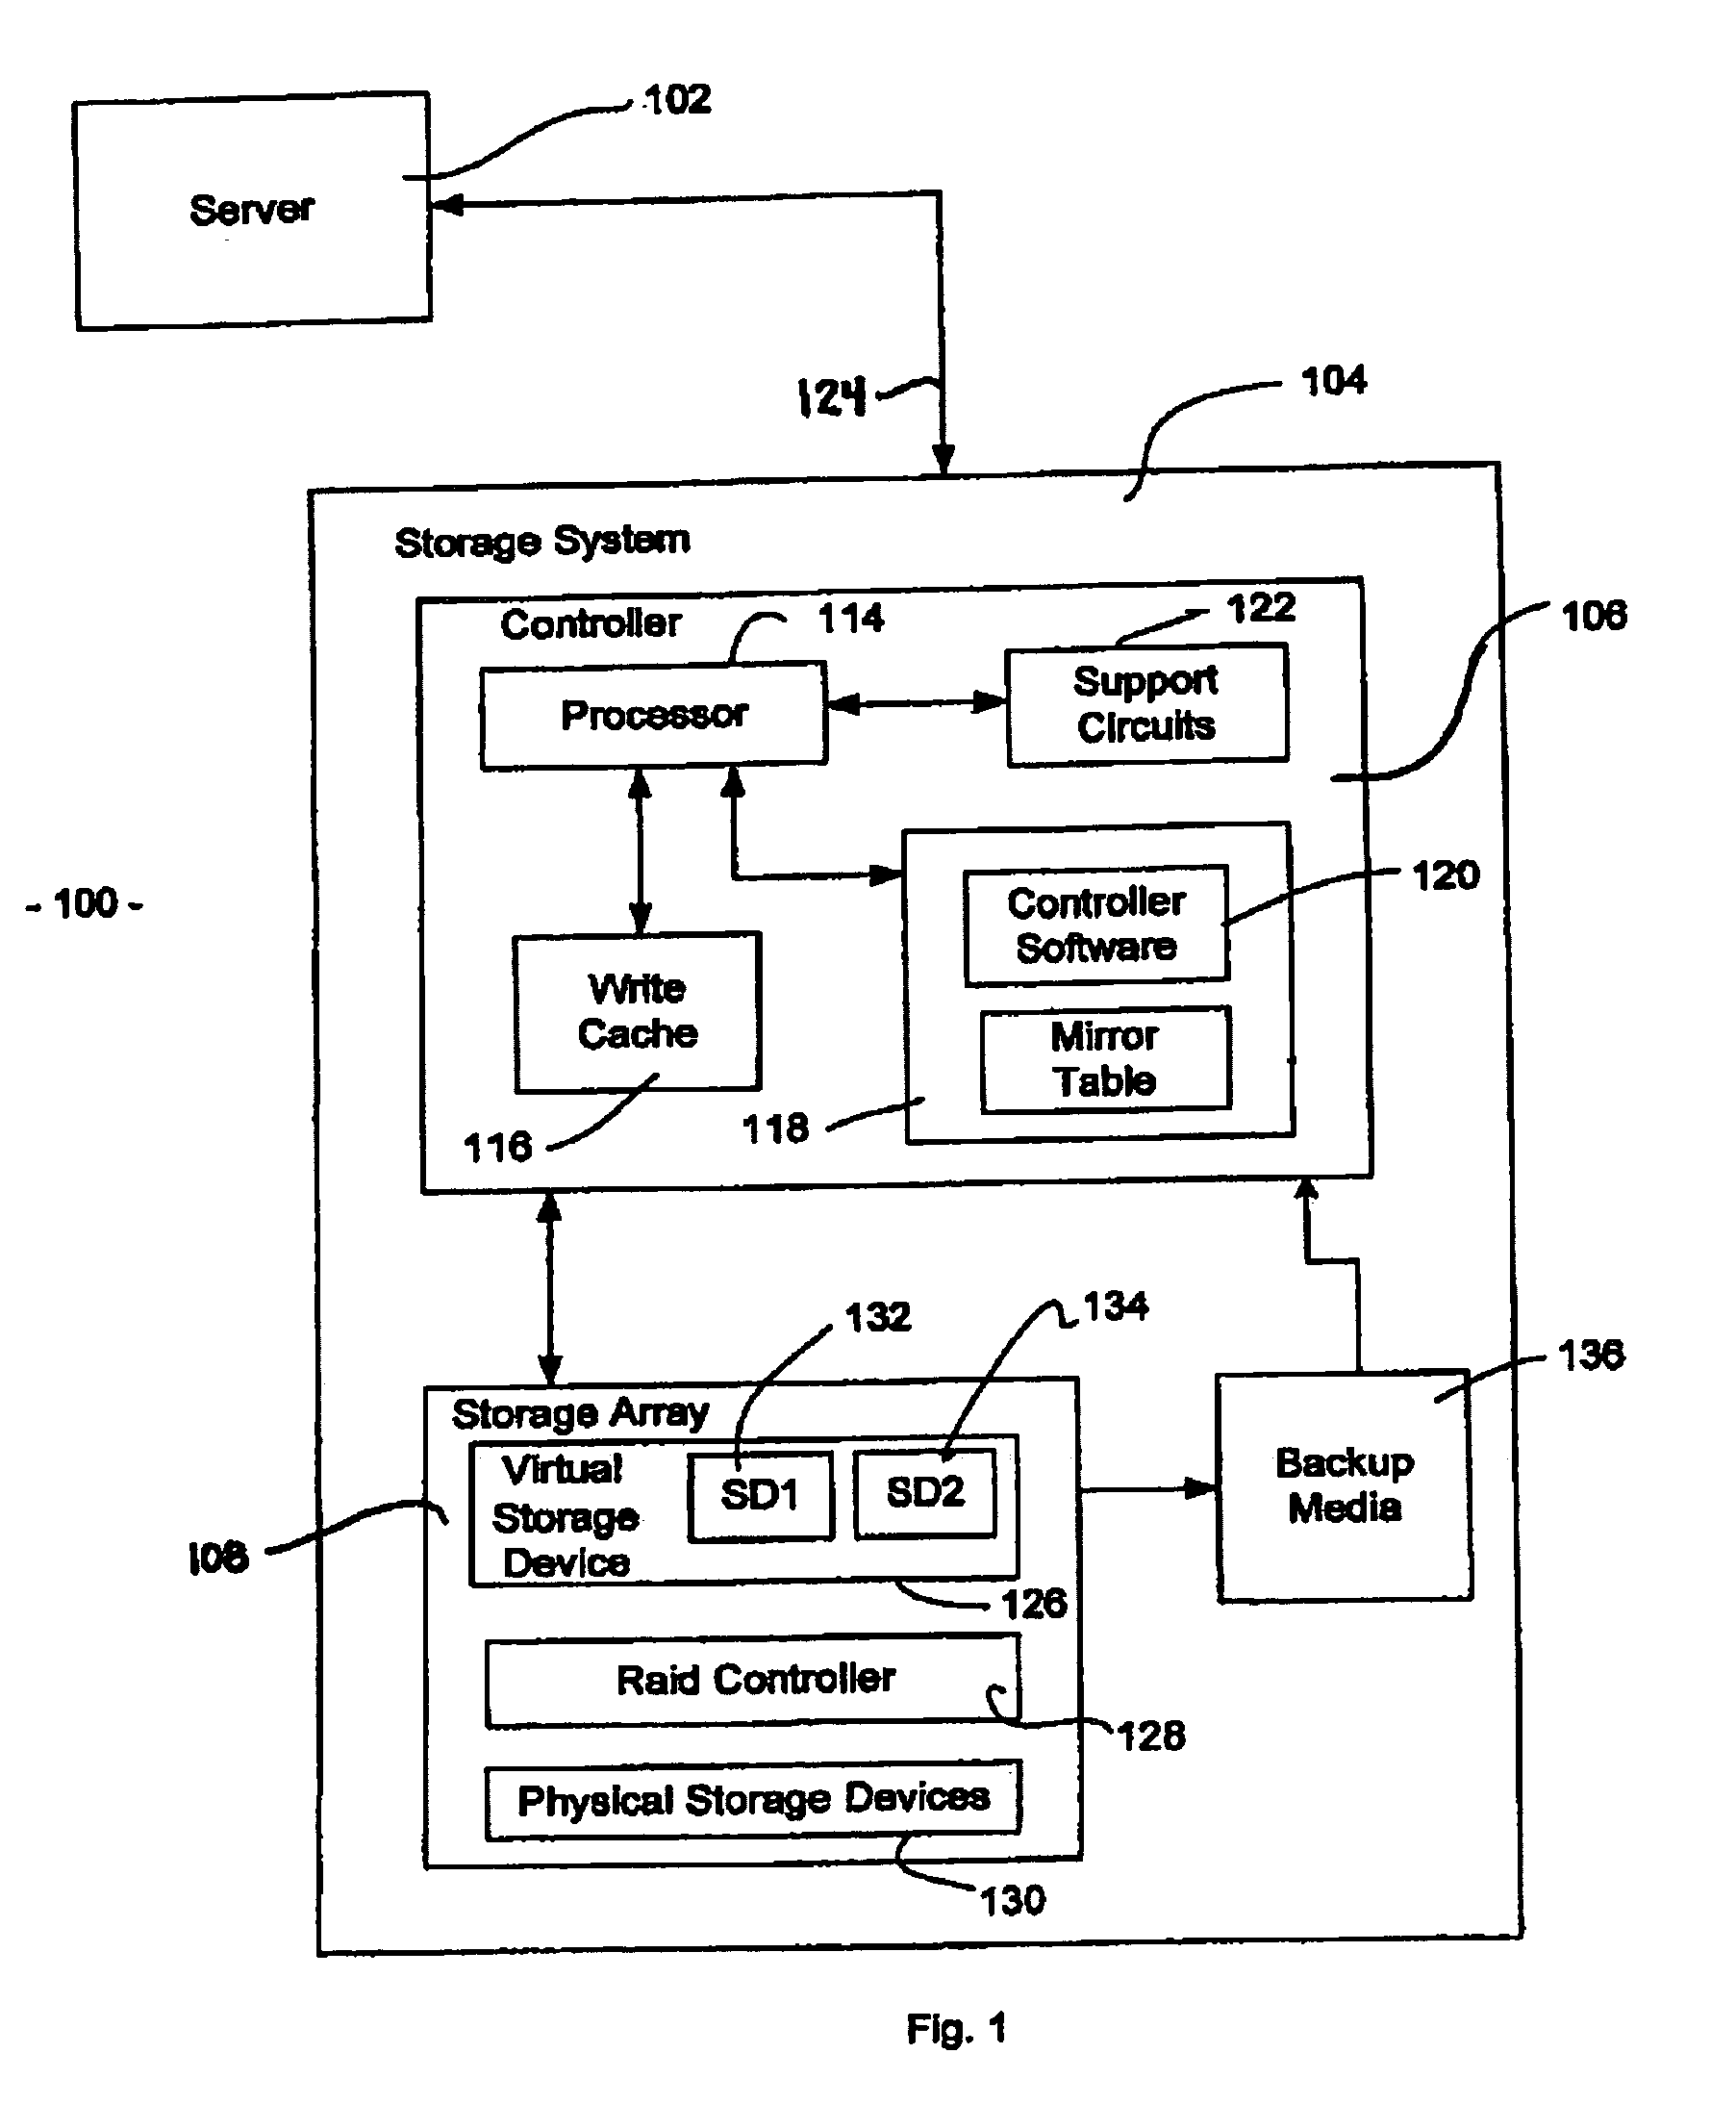 Method and apparatus for mirroring data stored in a mass storage system